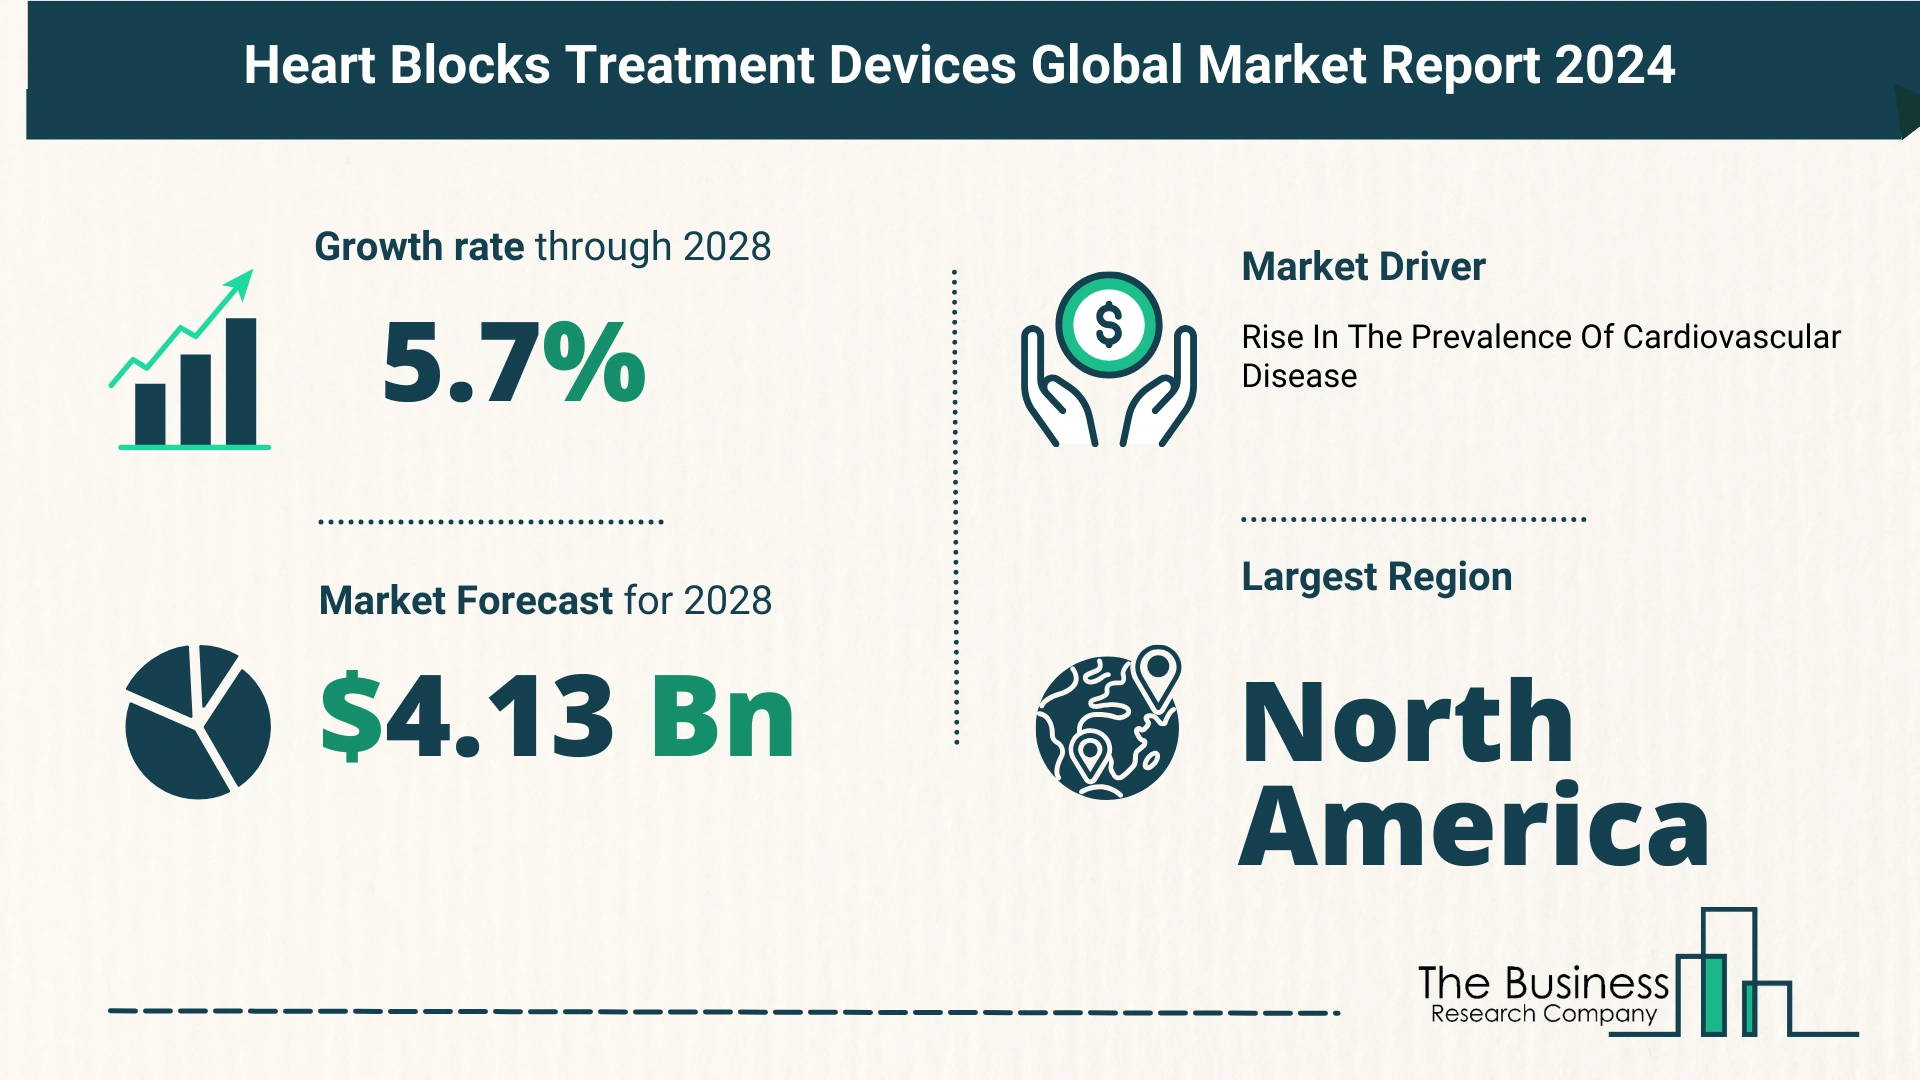 Key Trends And Drivers In The Heart Blocks Treatment Devices Market 2024